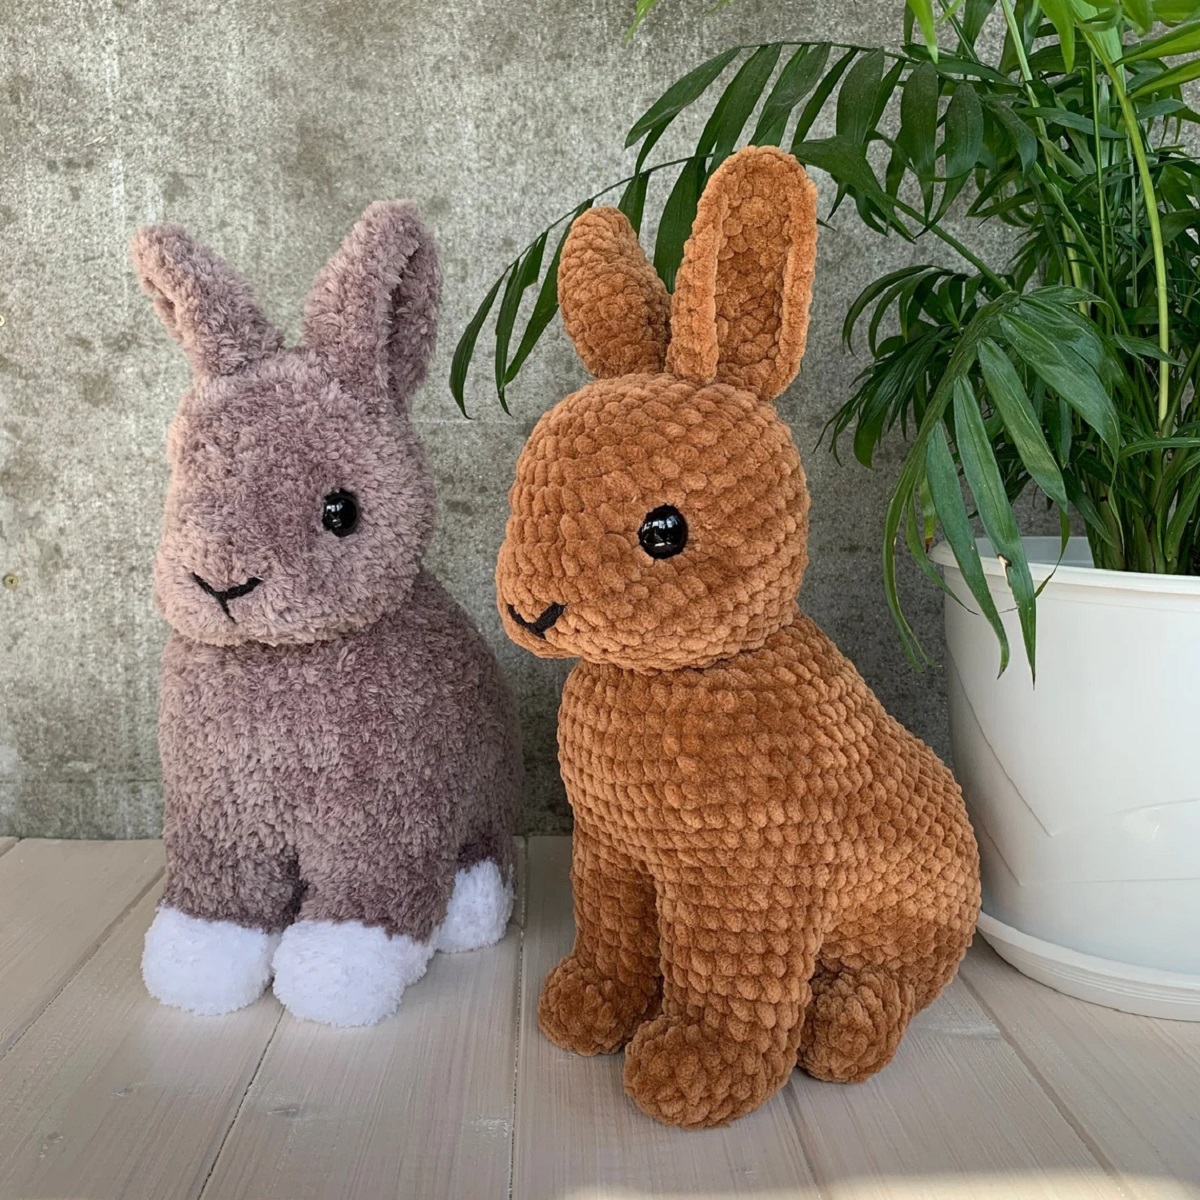 Two large life-like brown crochet stuffed bunnies sat next to each other on a white wooden floor next to a plant pot.